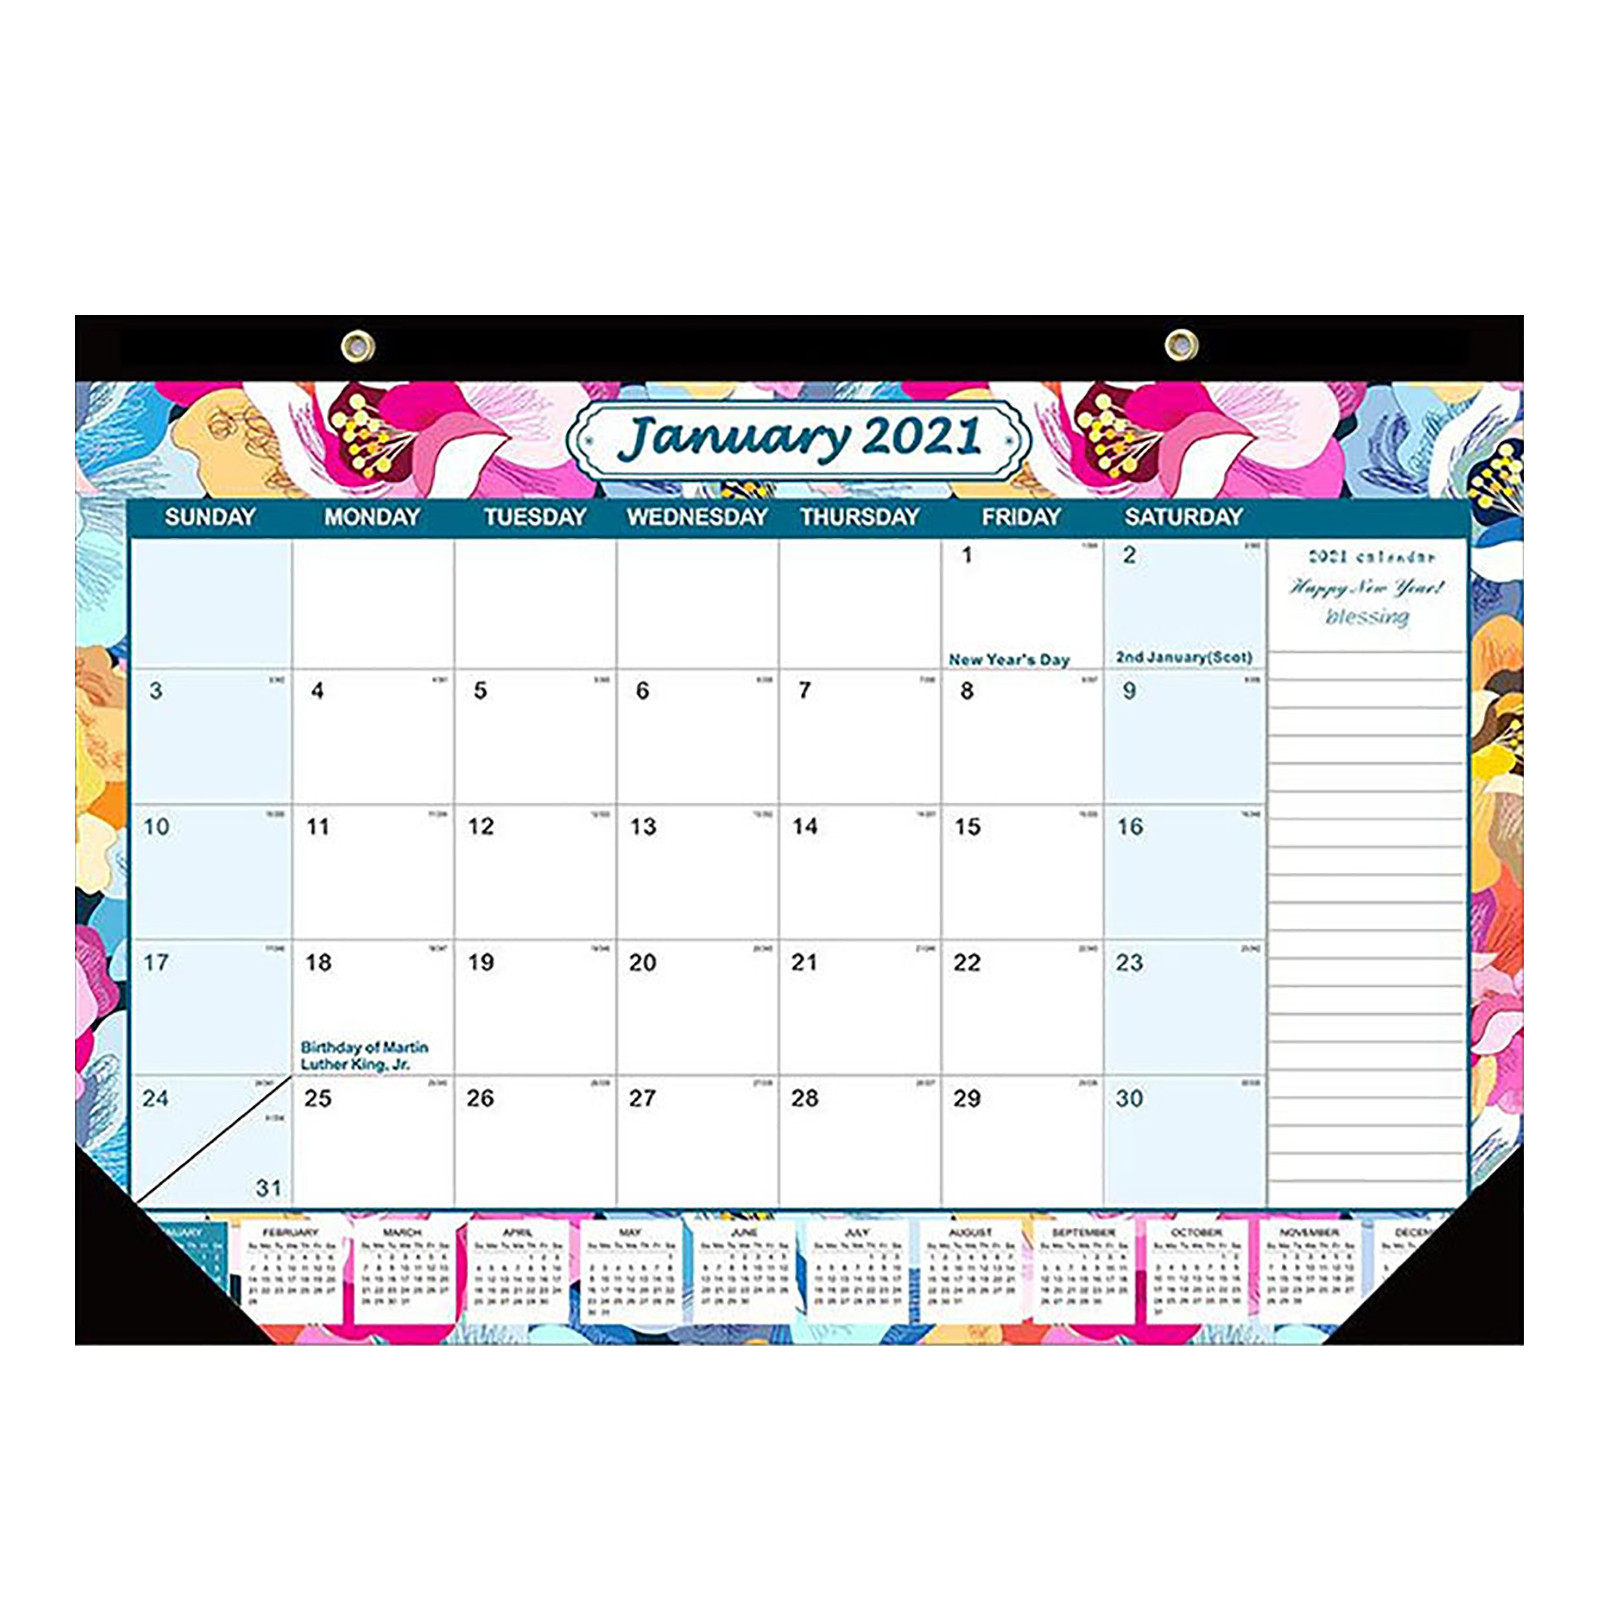 Donald 2021 Desk Calendar With Notes And Julian Date Jan 2021 Thick Paper  With Colorful - Walmart